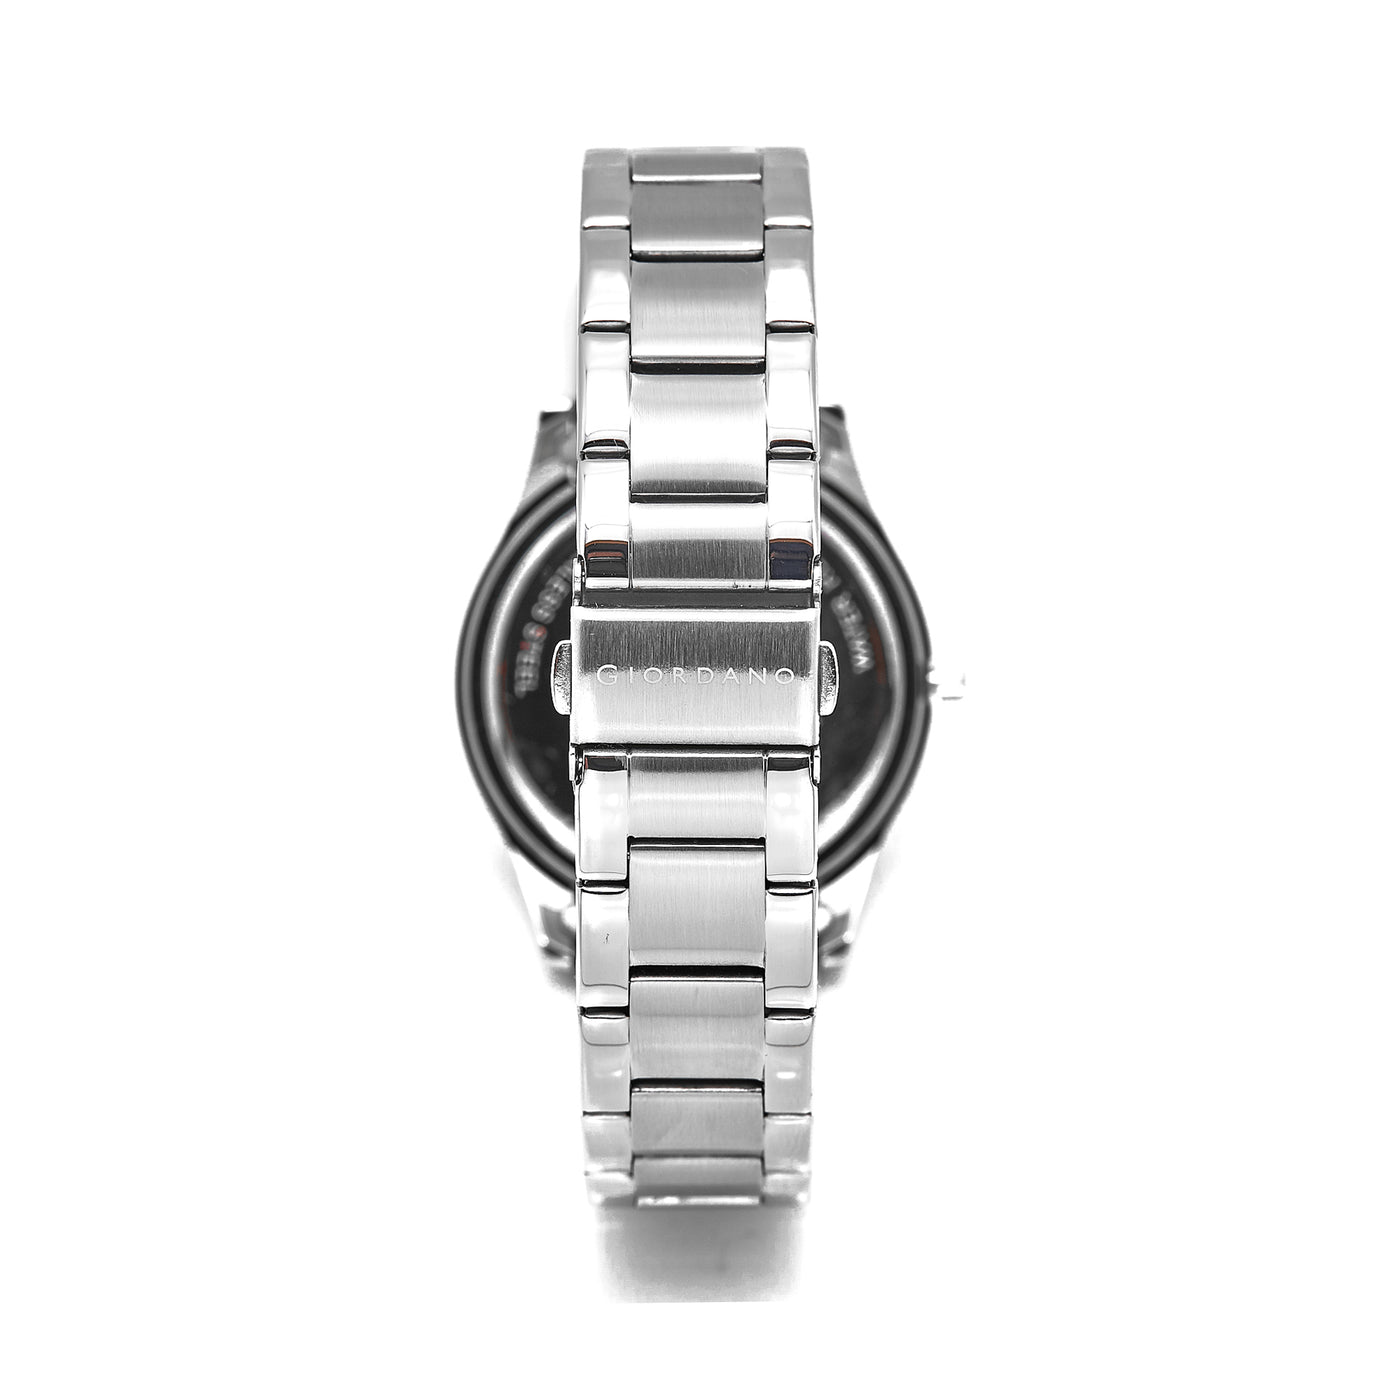 Giordano Classic-Men's 3-Hand 40mm Stainless Steel Band